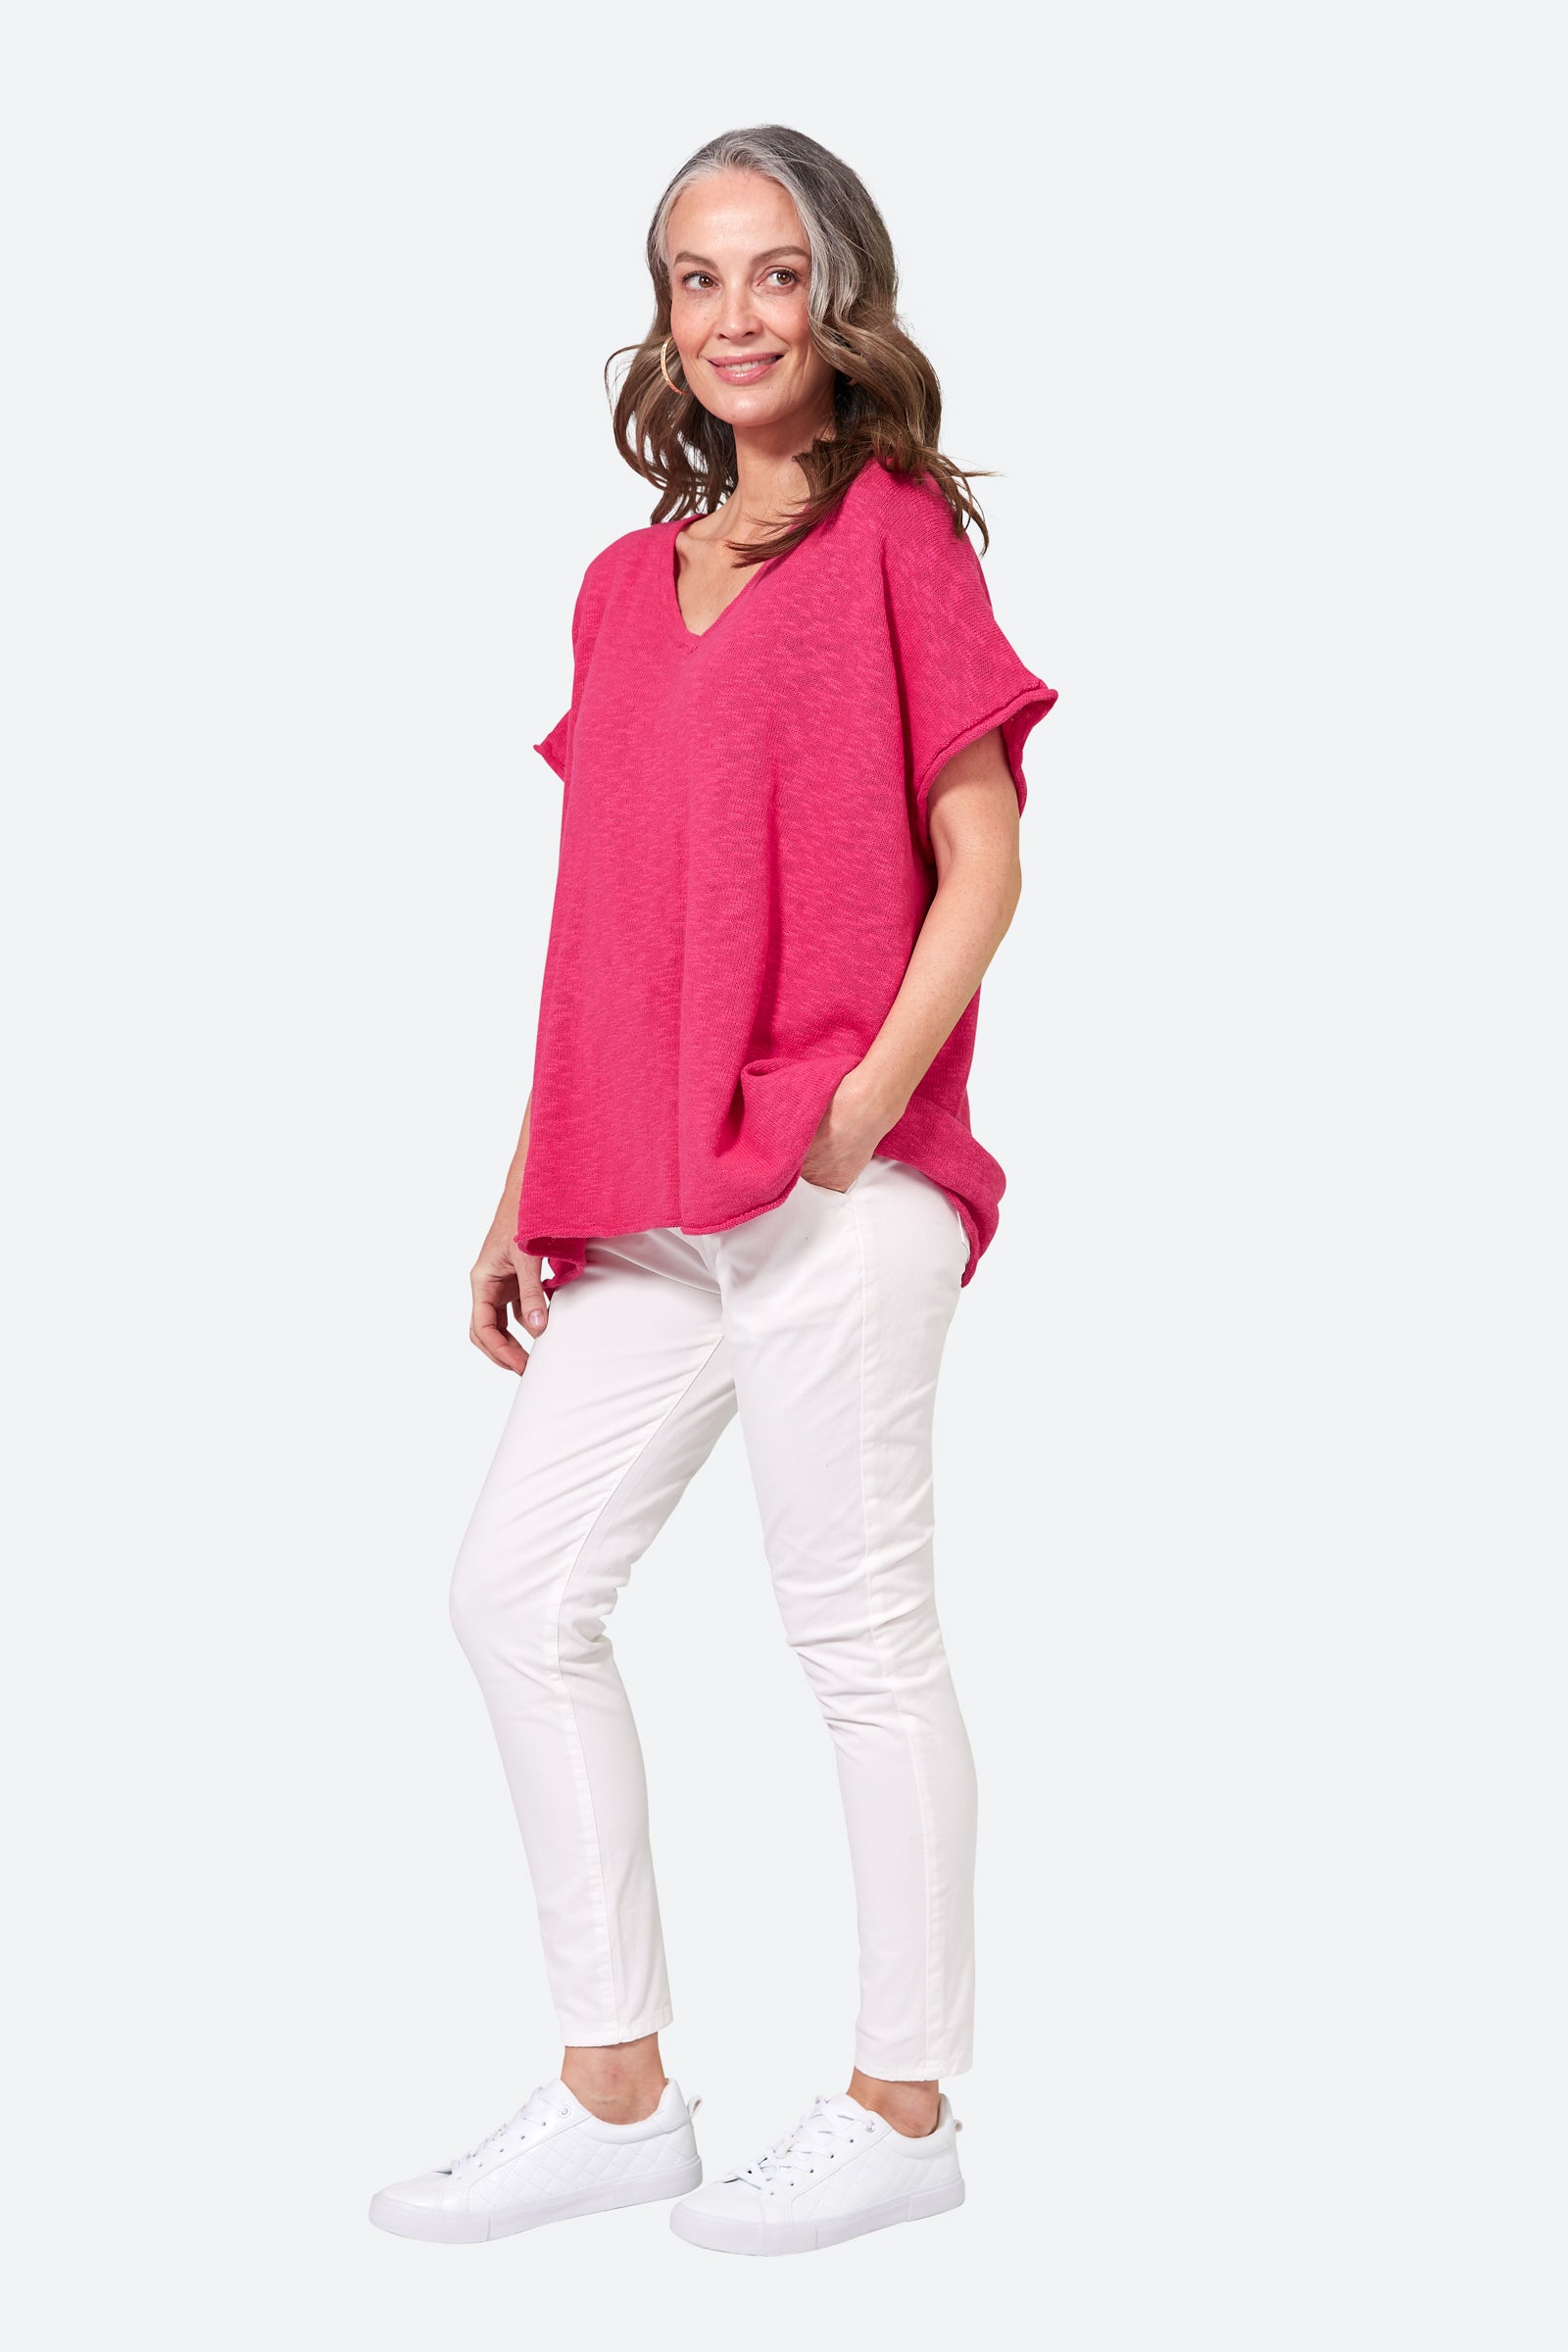 Jovial Top - Fuchsia - eb&ive Clothing - Knit Top S/S